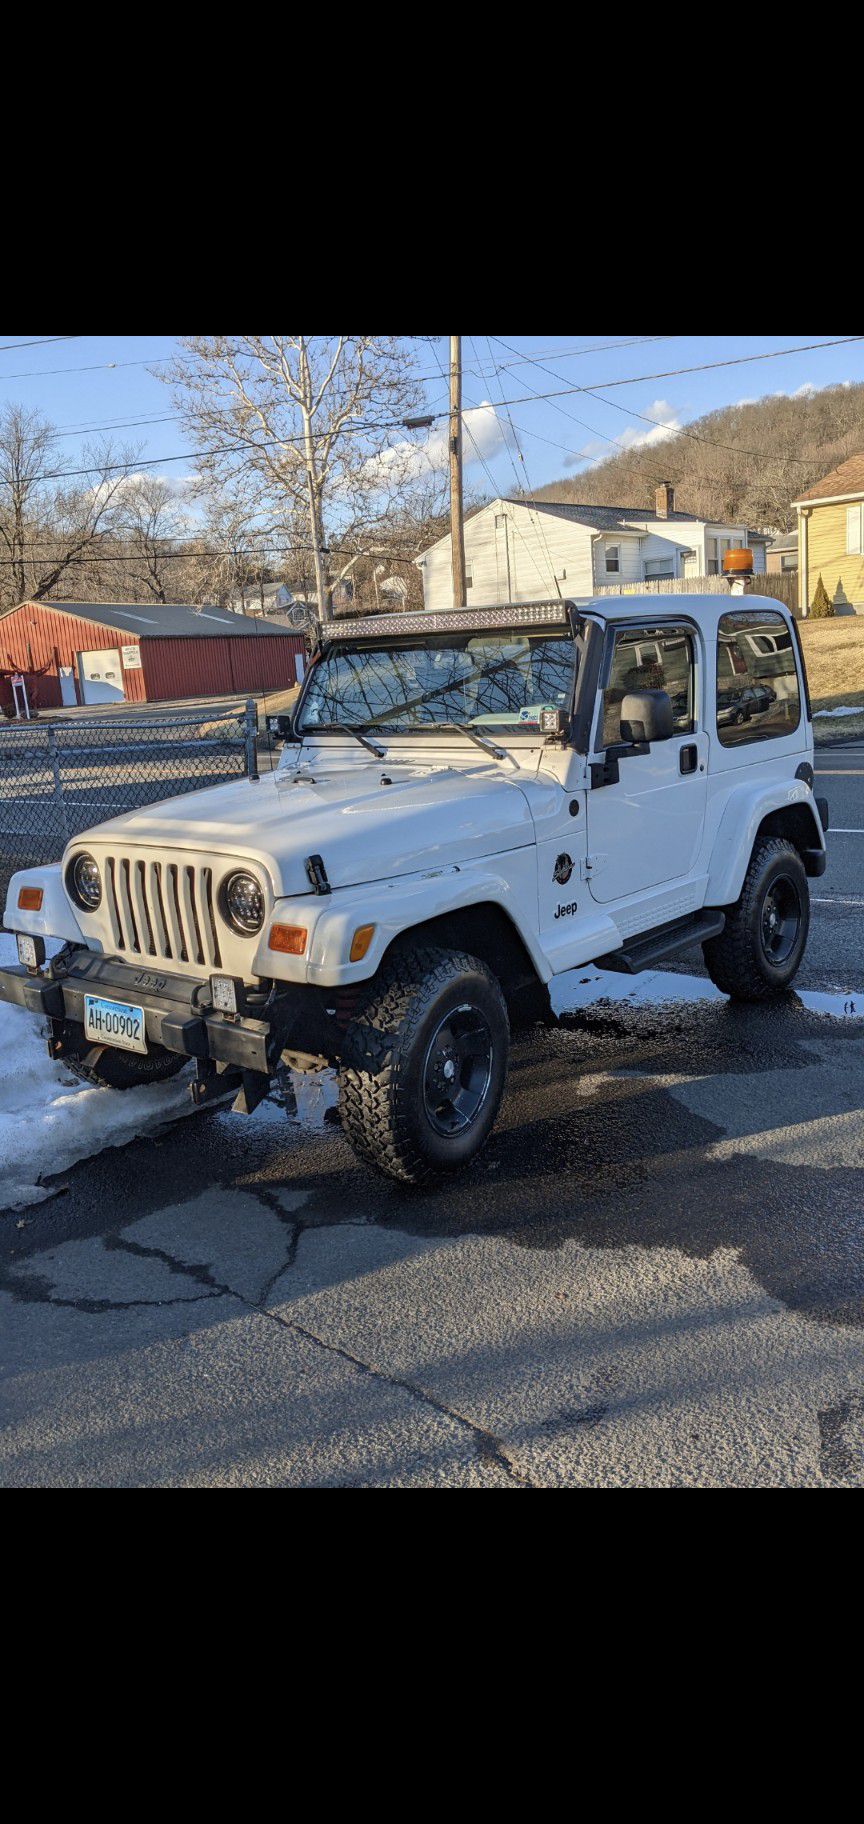 2001 Jeep Wrangler for Sale in Derby, CT - OfferUp